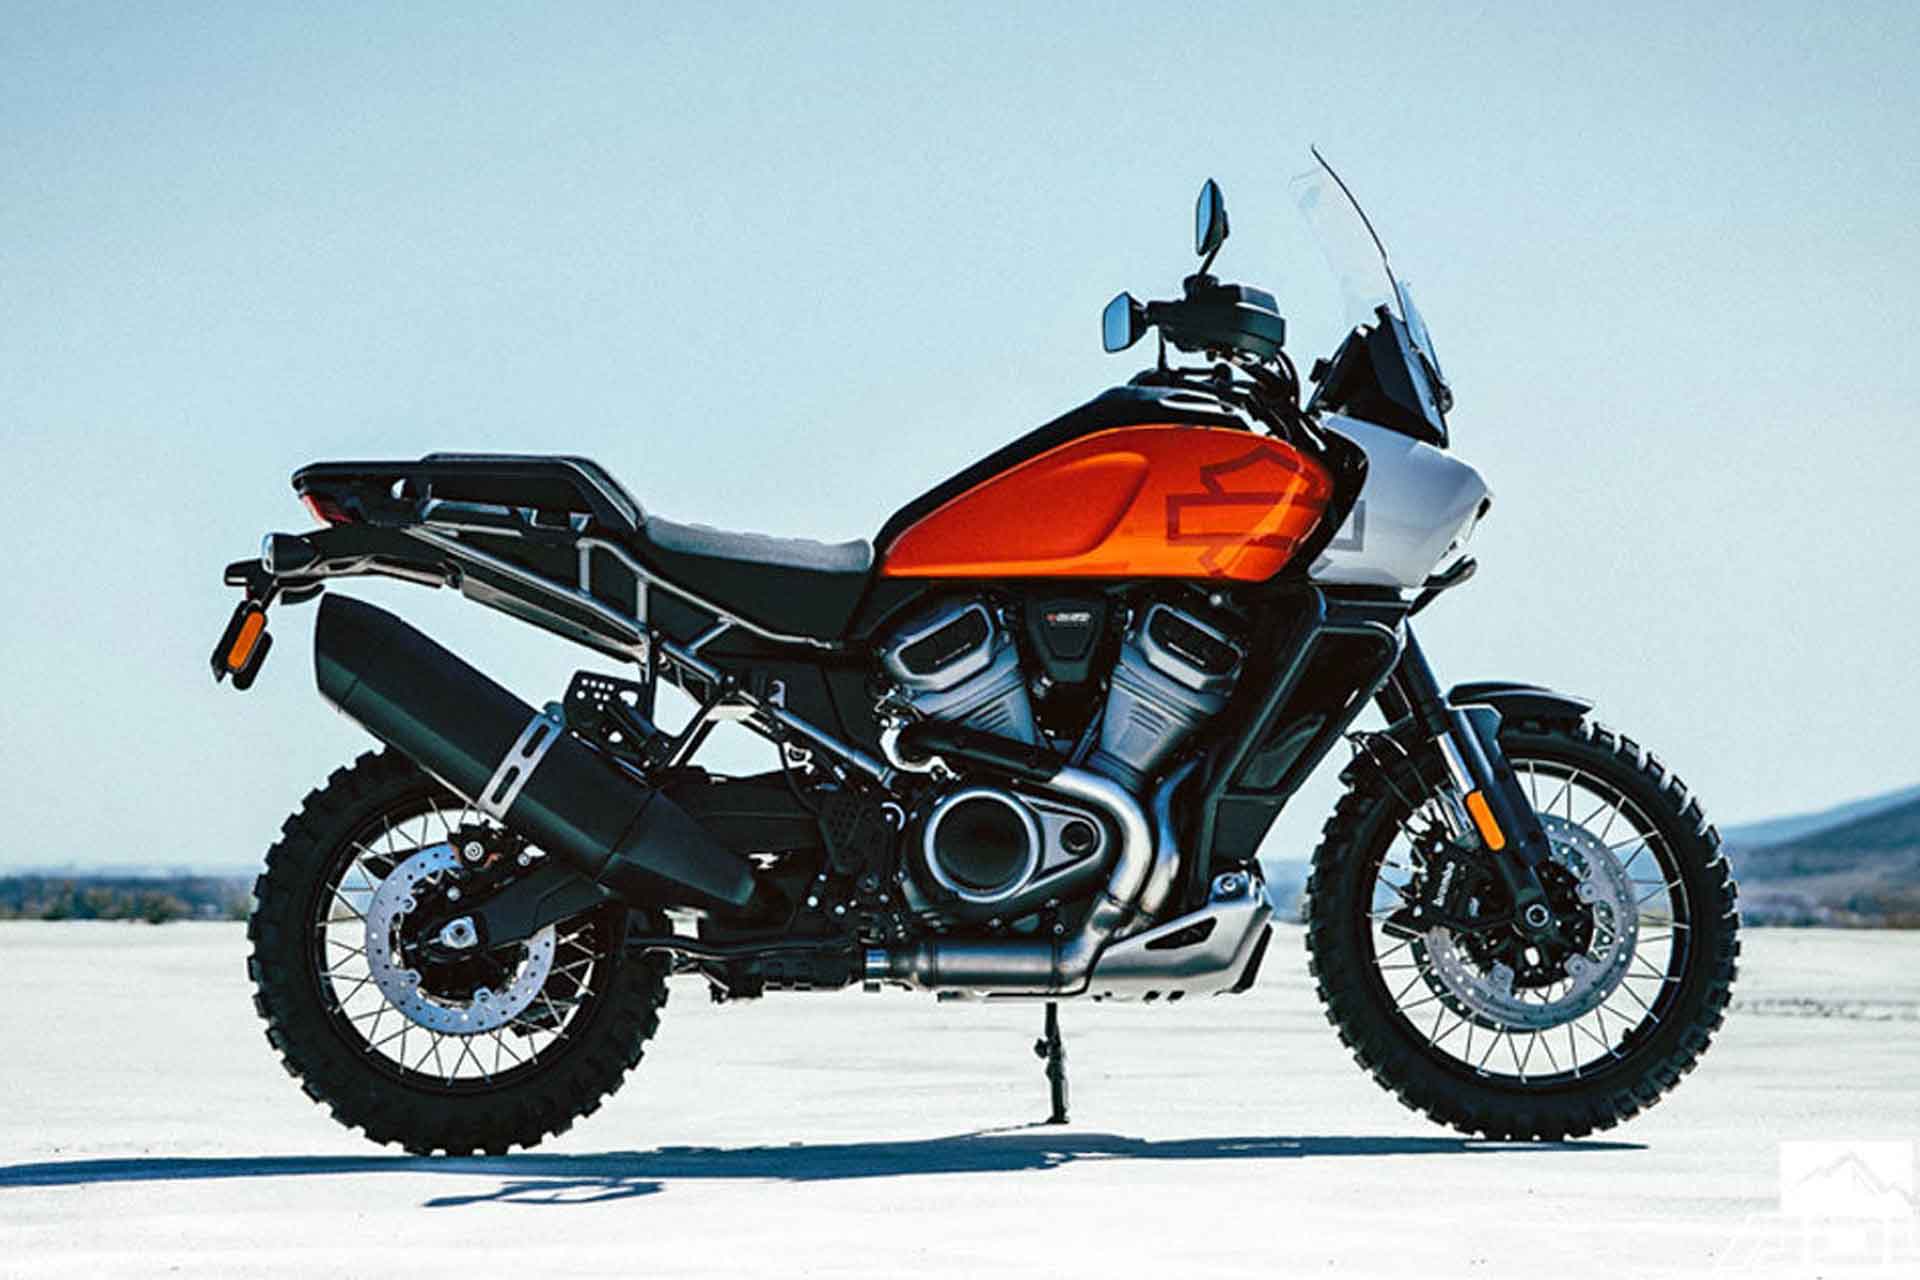 Harley Davidson Pan America Launched Officially Priced From 454 Million Electrodealpro